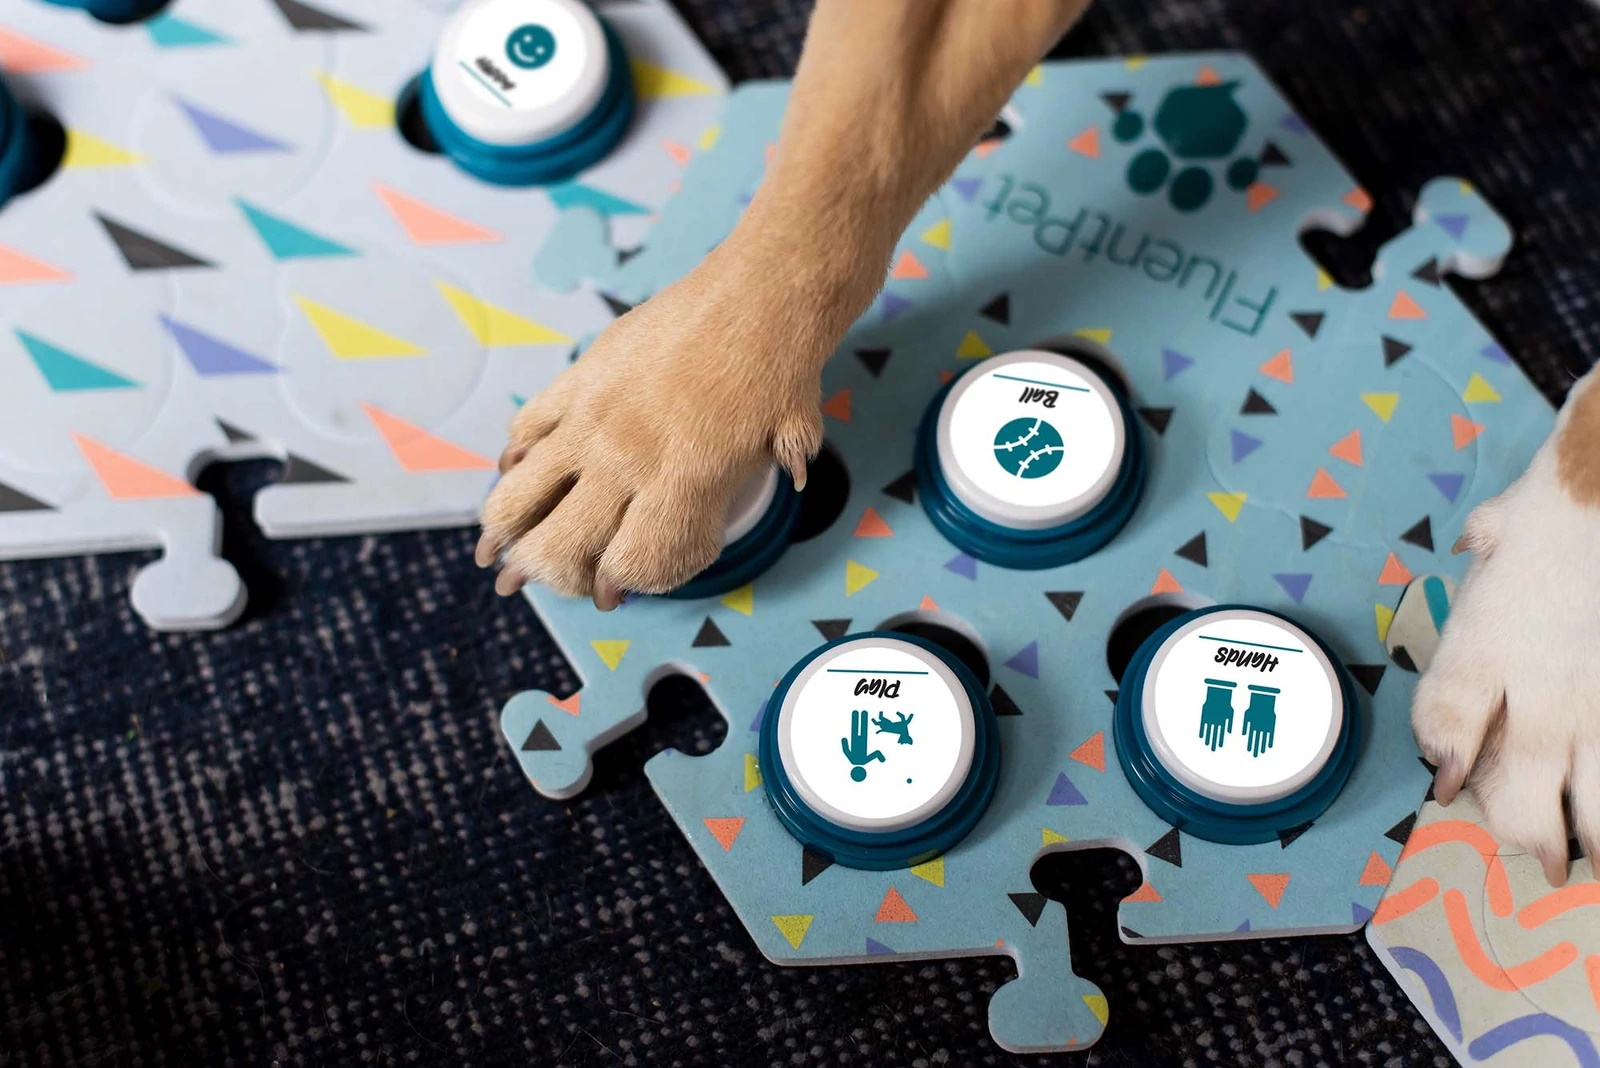 A dog's paws press buttons that emit words.